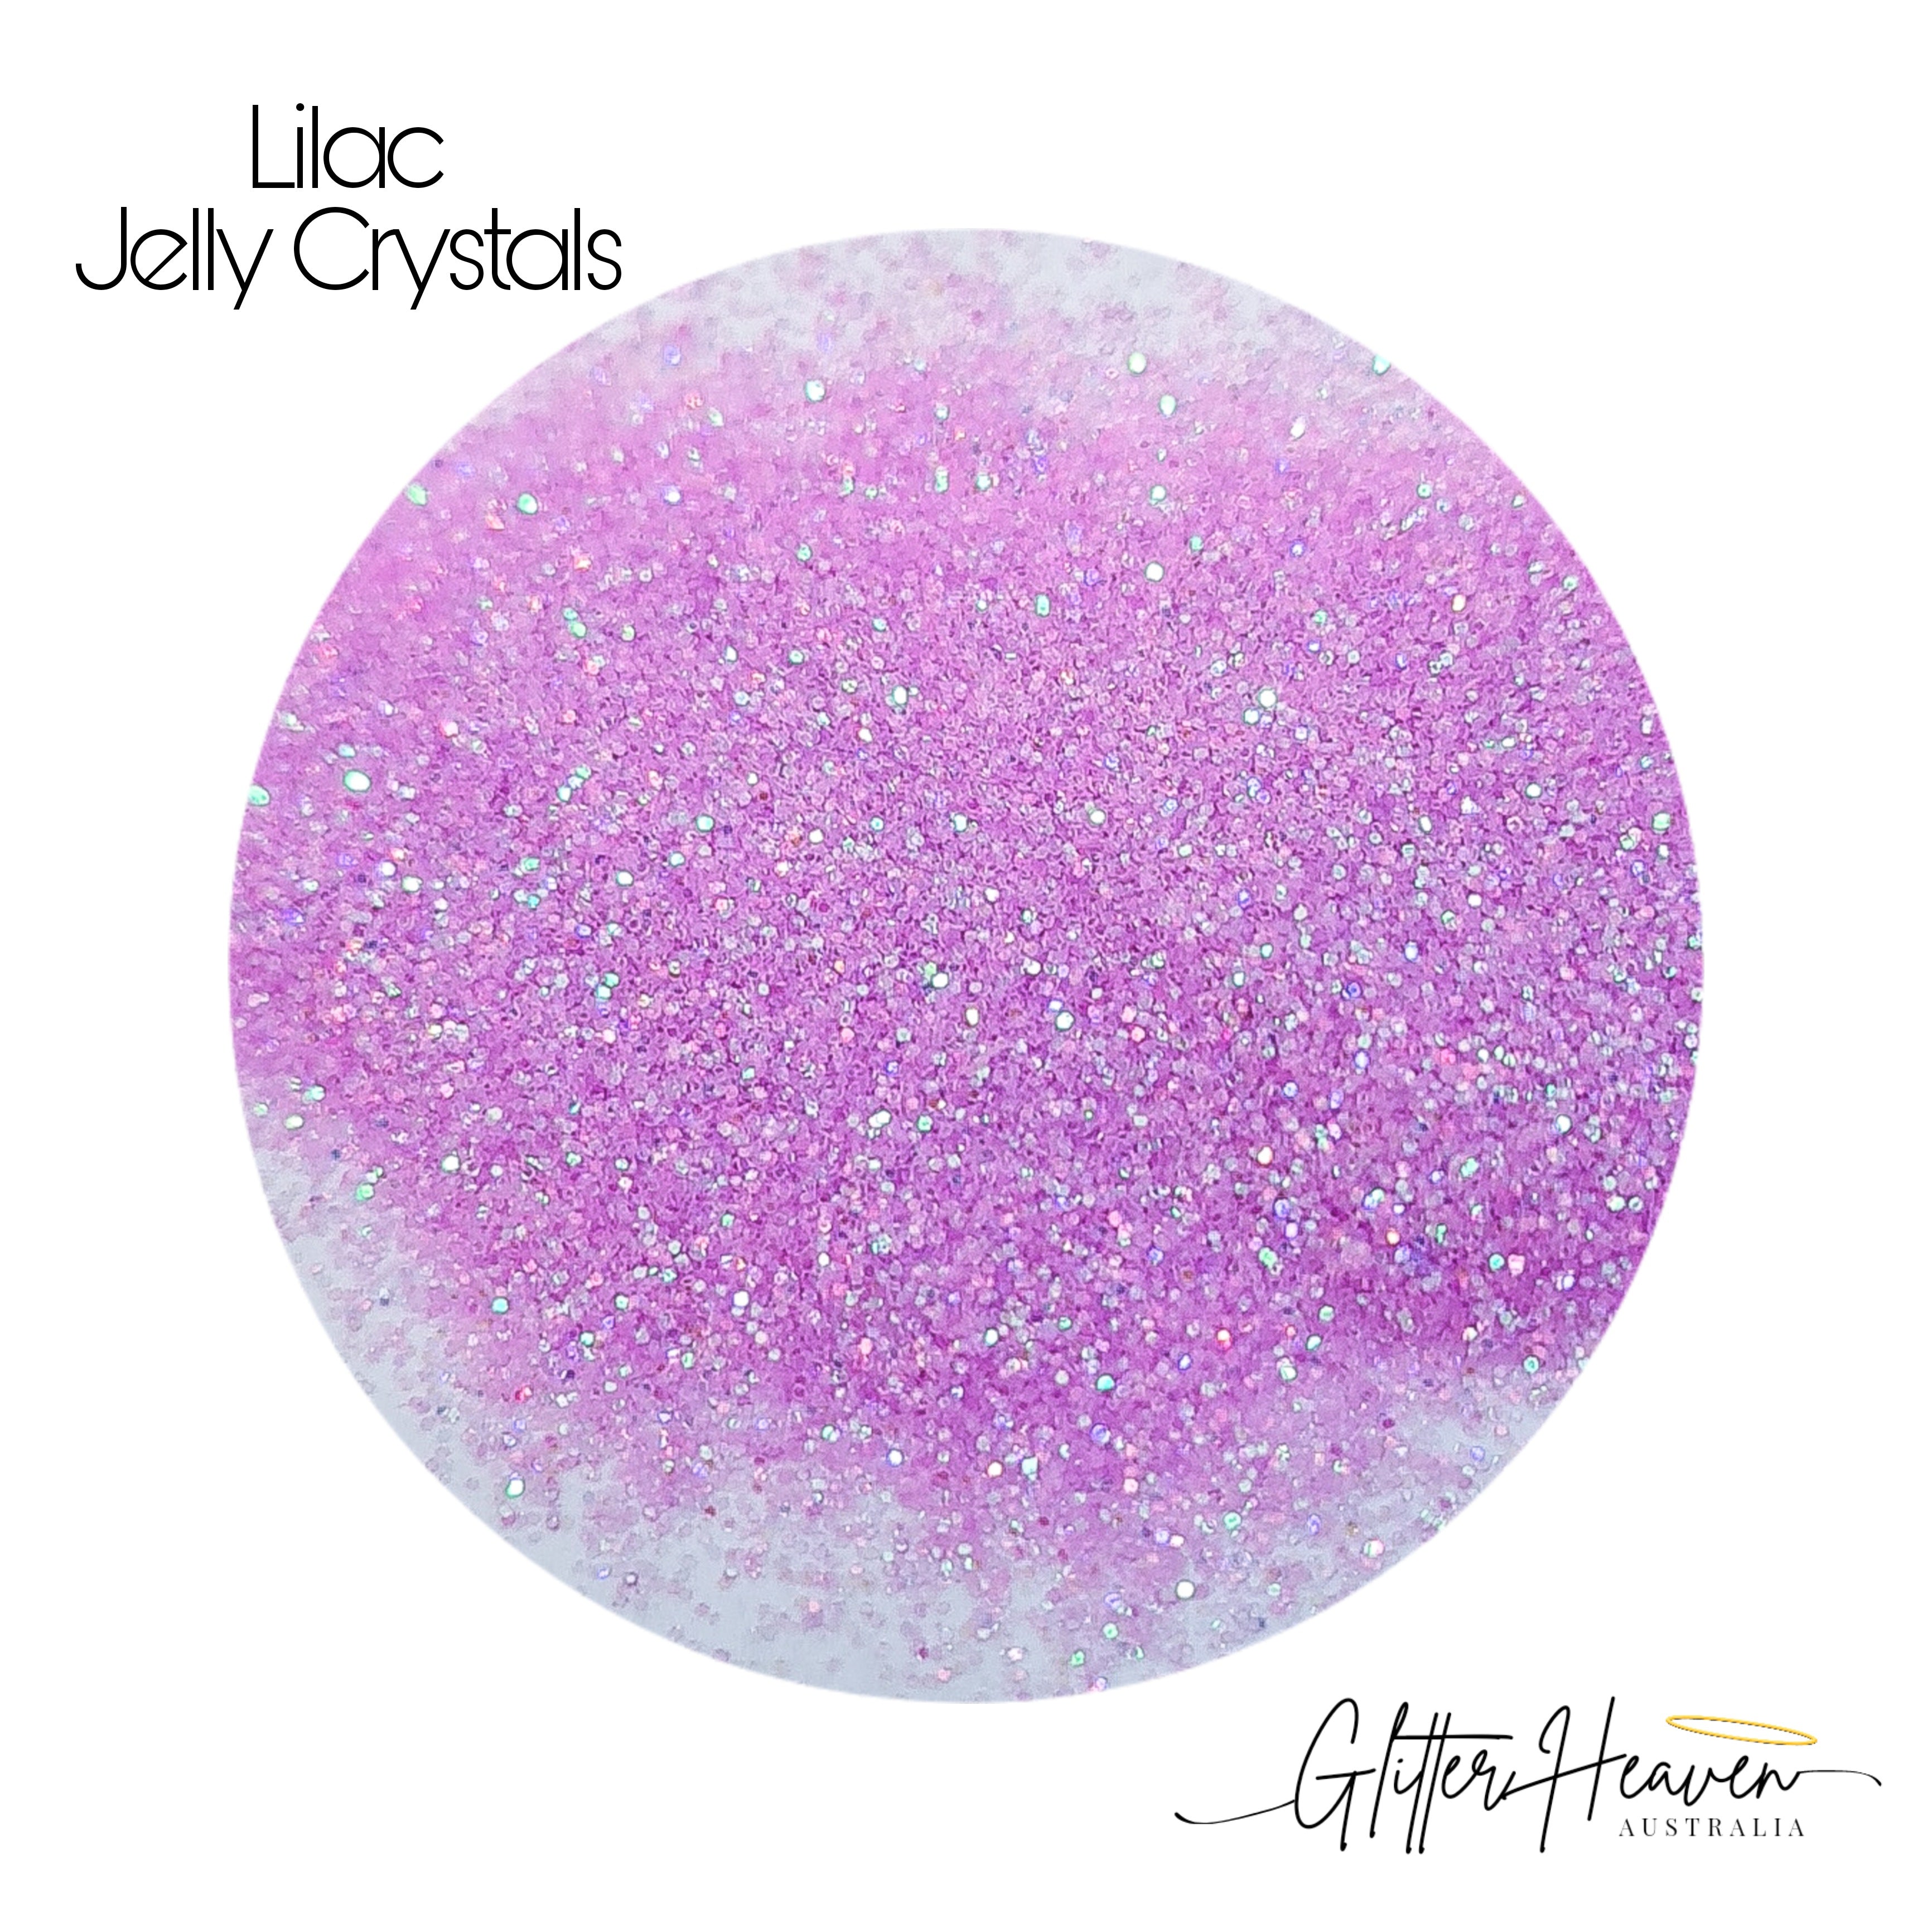 Lilac Jelly Crystals